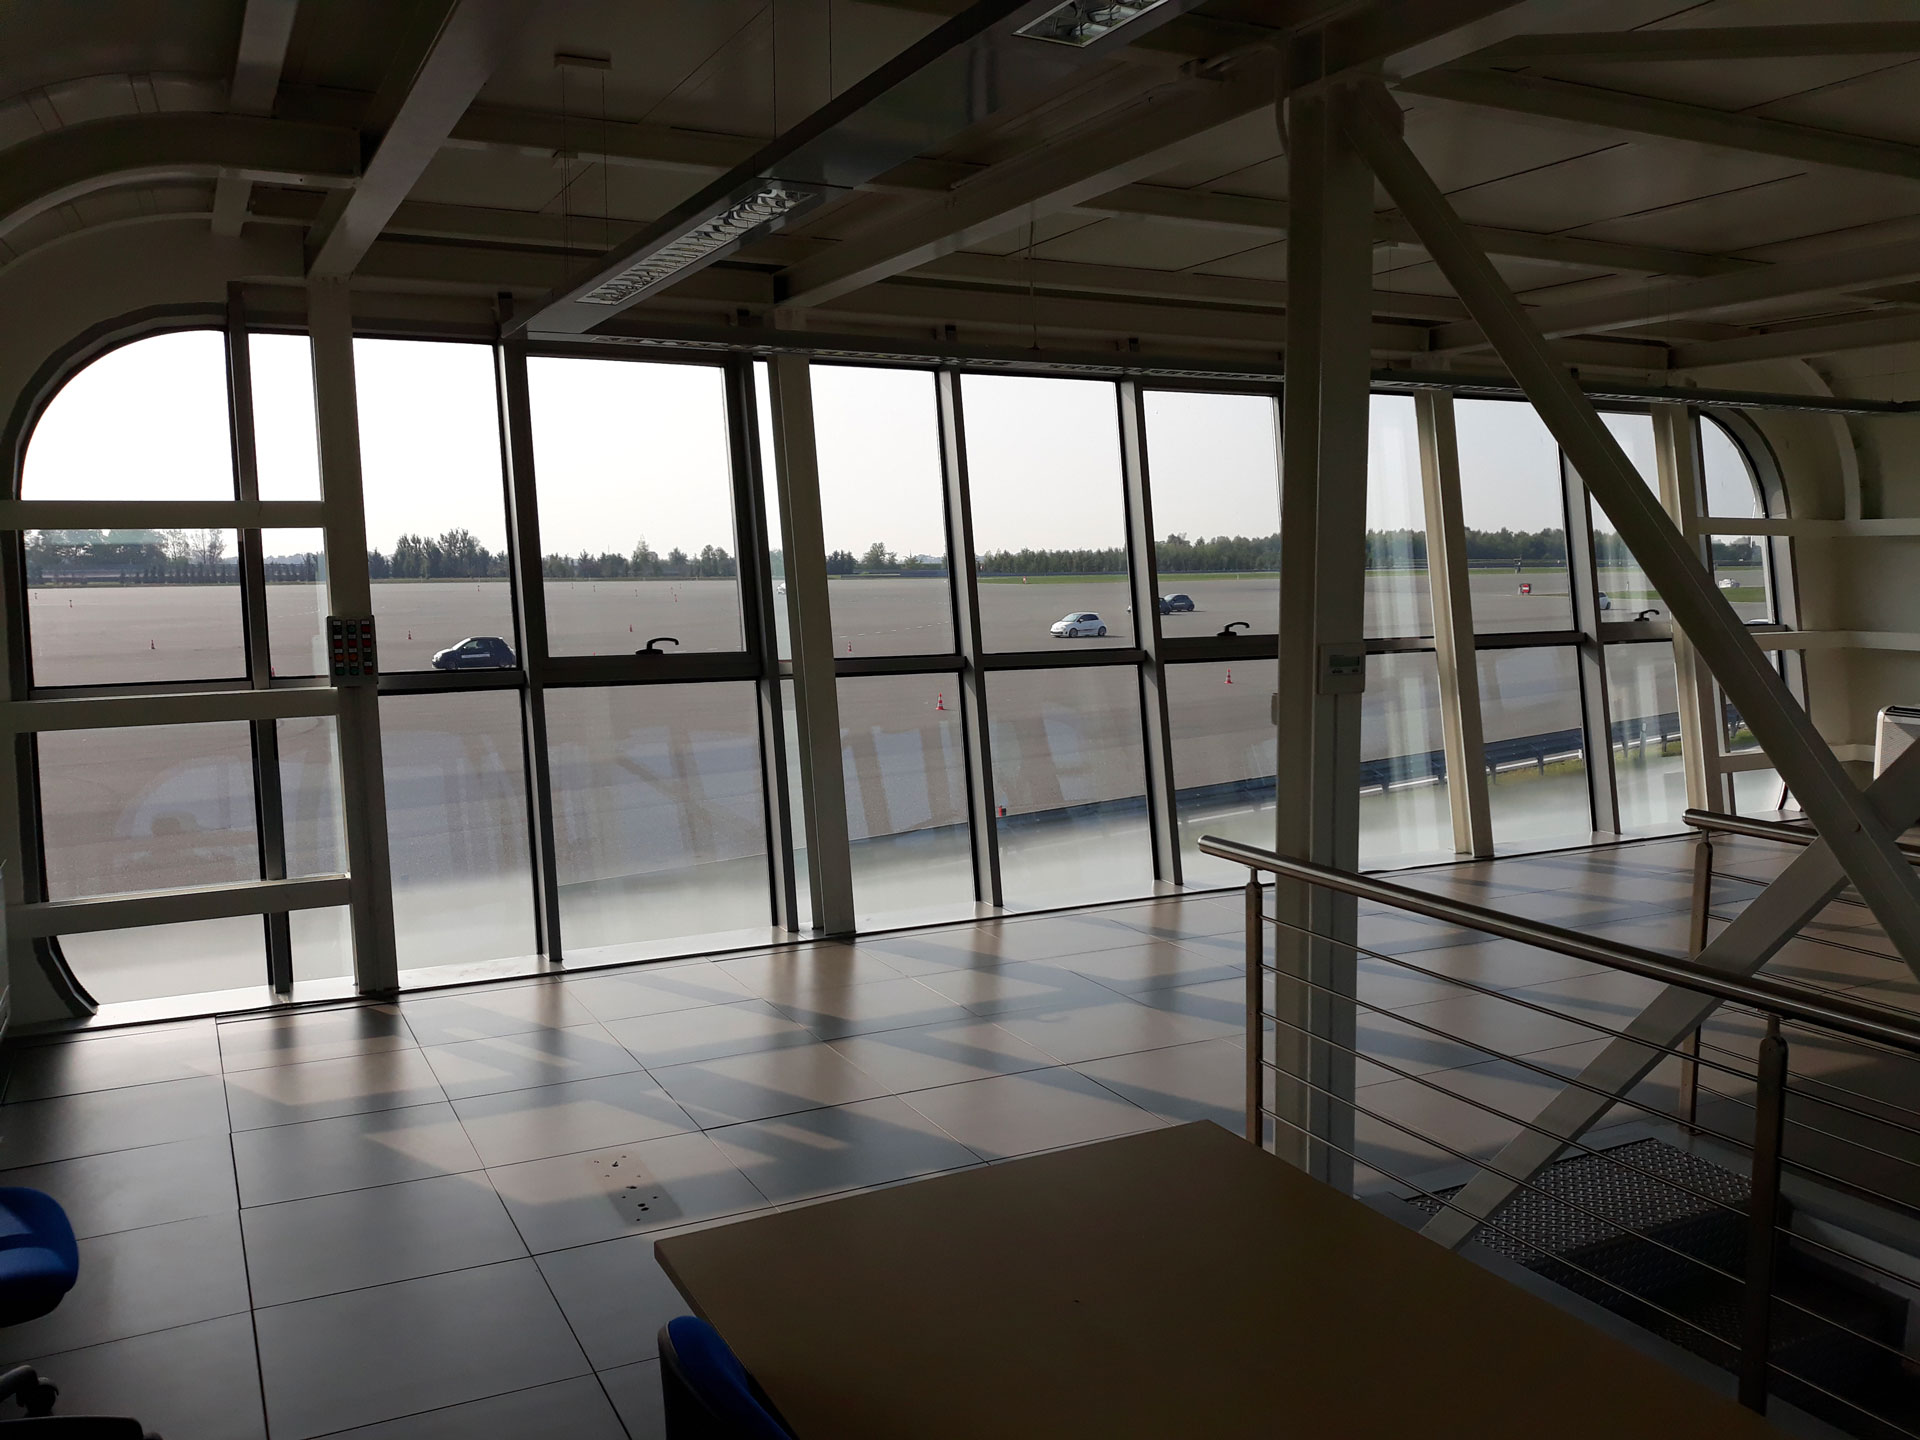 Photo of the Dynamic Platform track as seen from a glass window